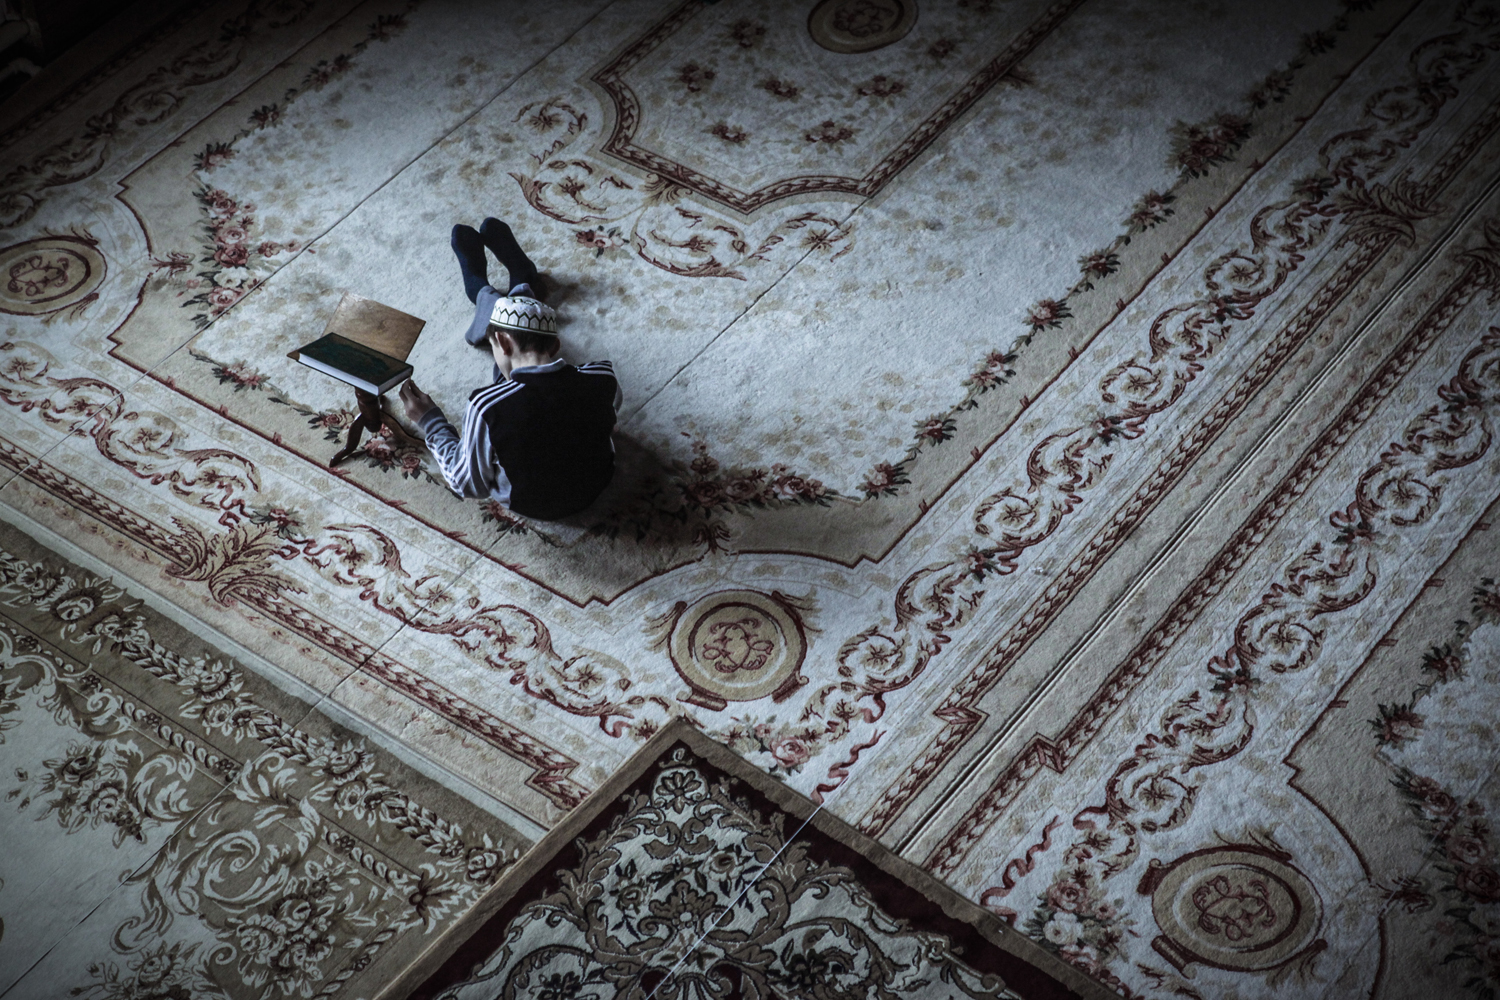 A boy studying Koran in a mosque in Makhachkala.